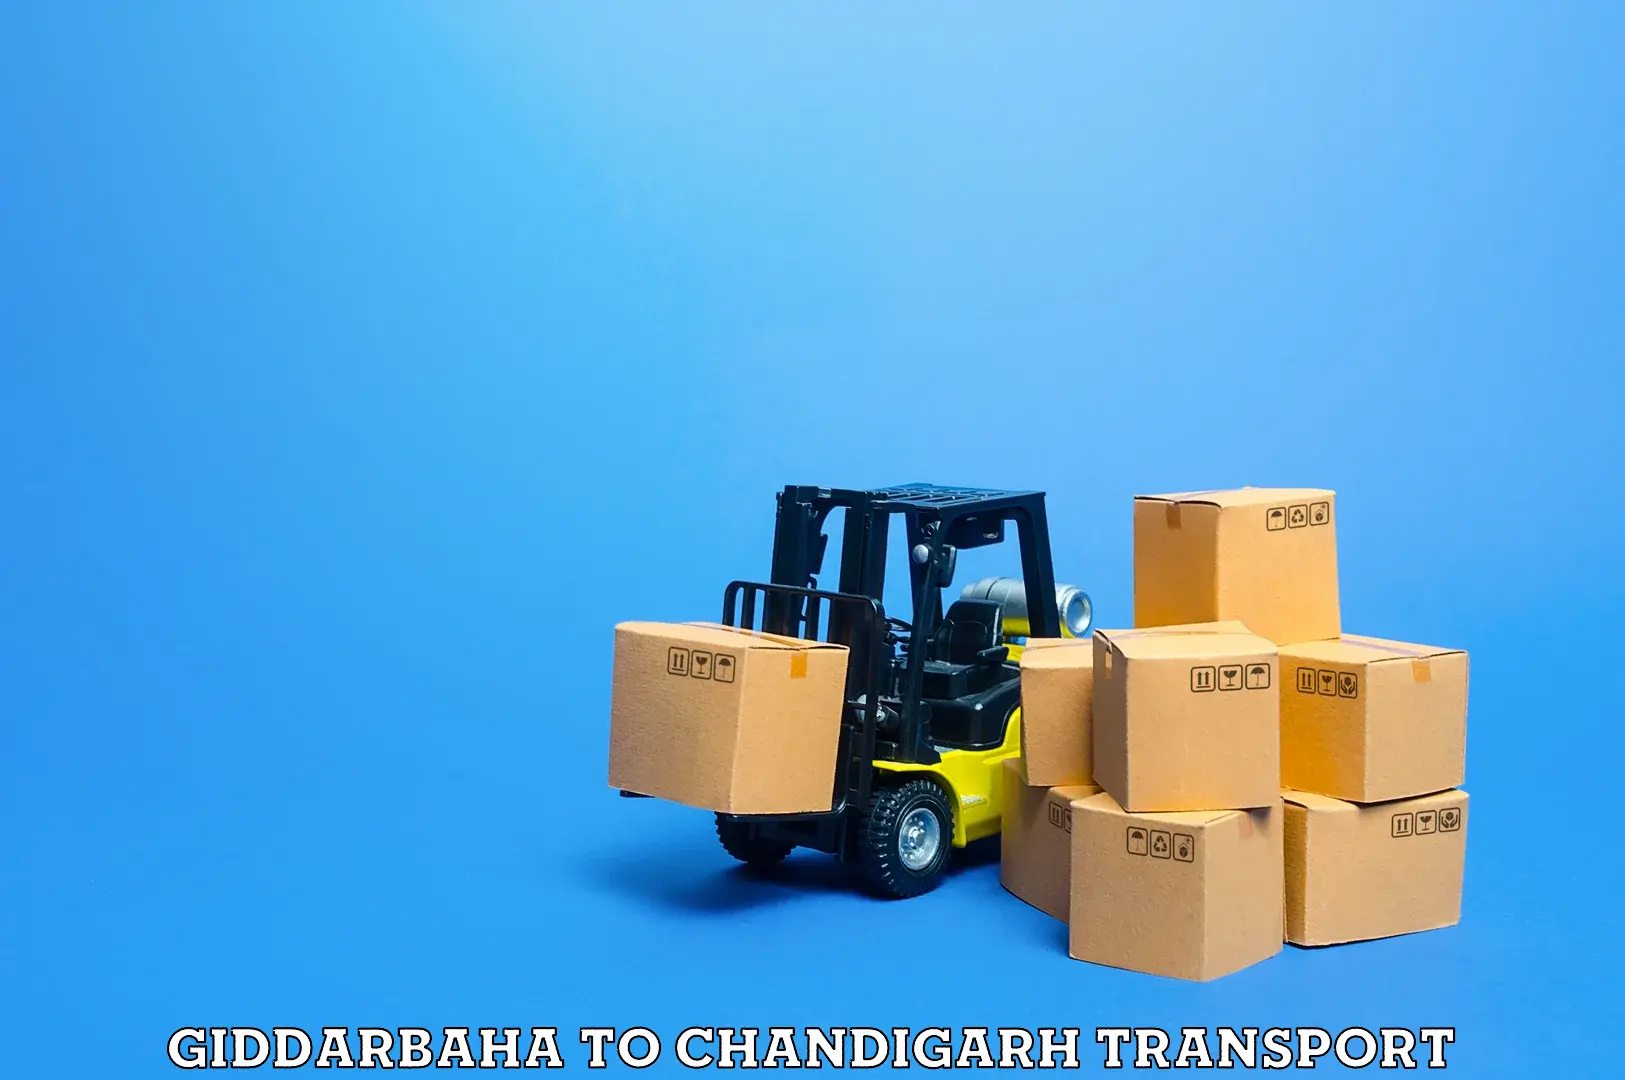 Vehicle transport services Giddarbaha to Chandigarh